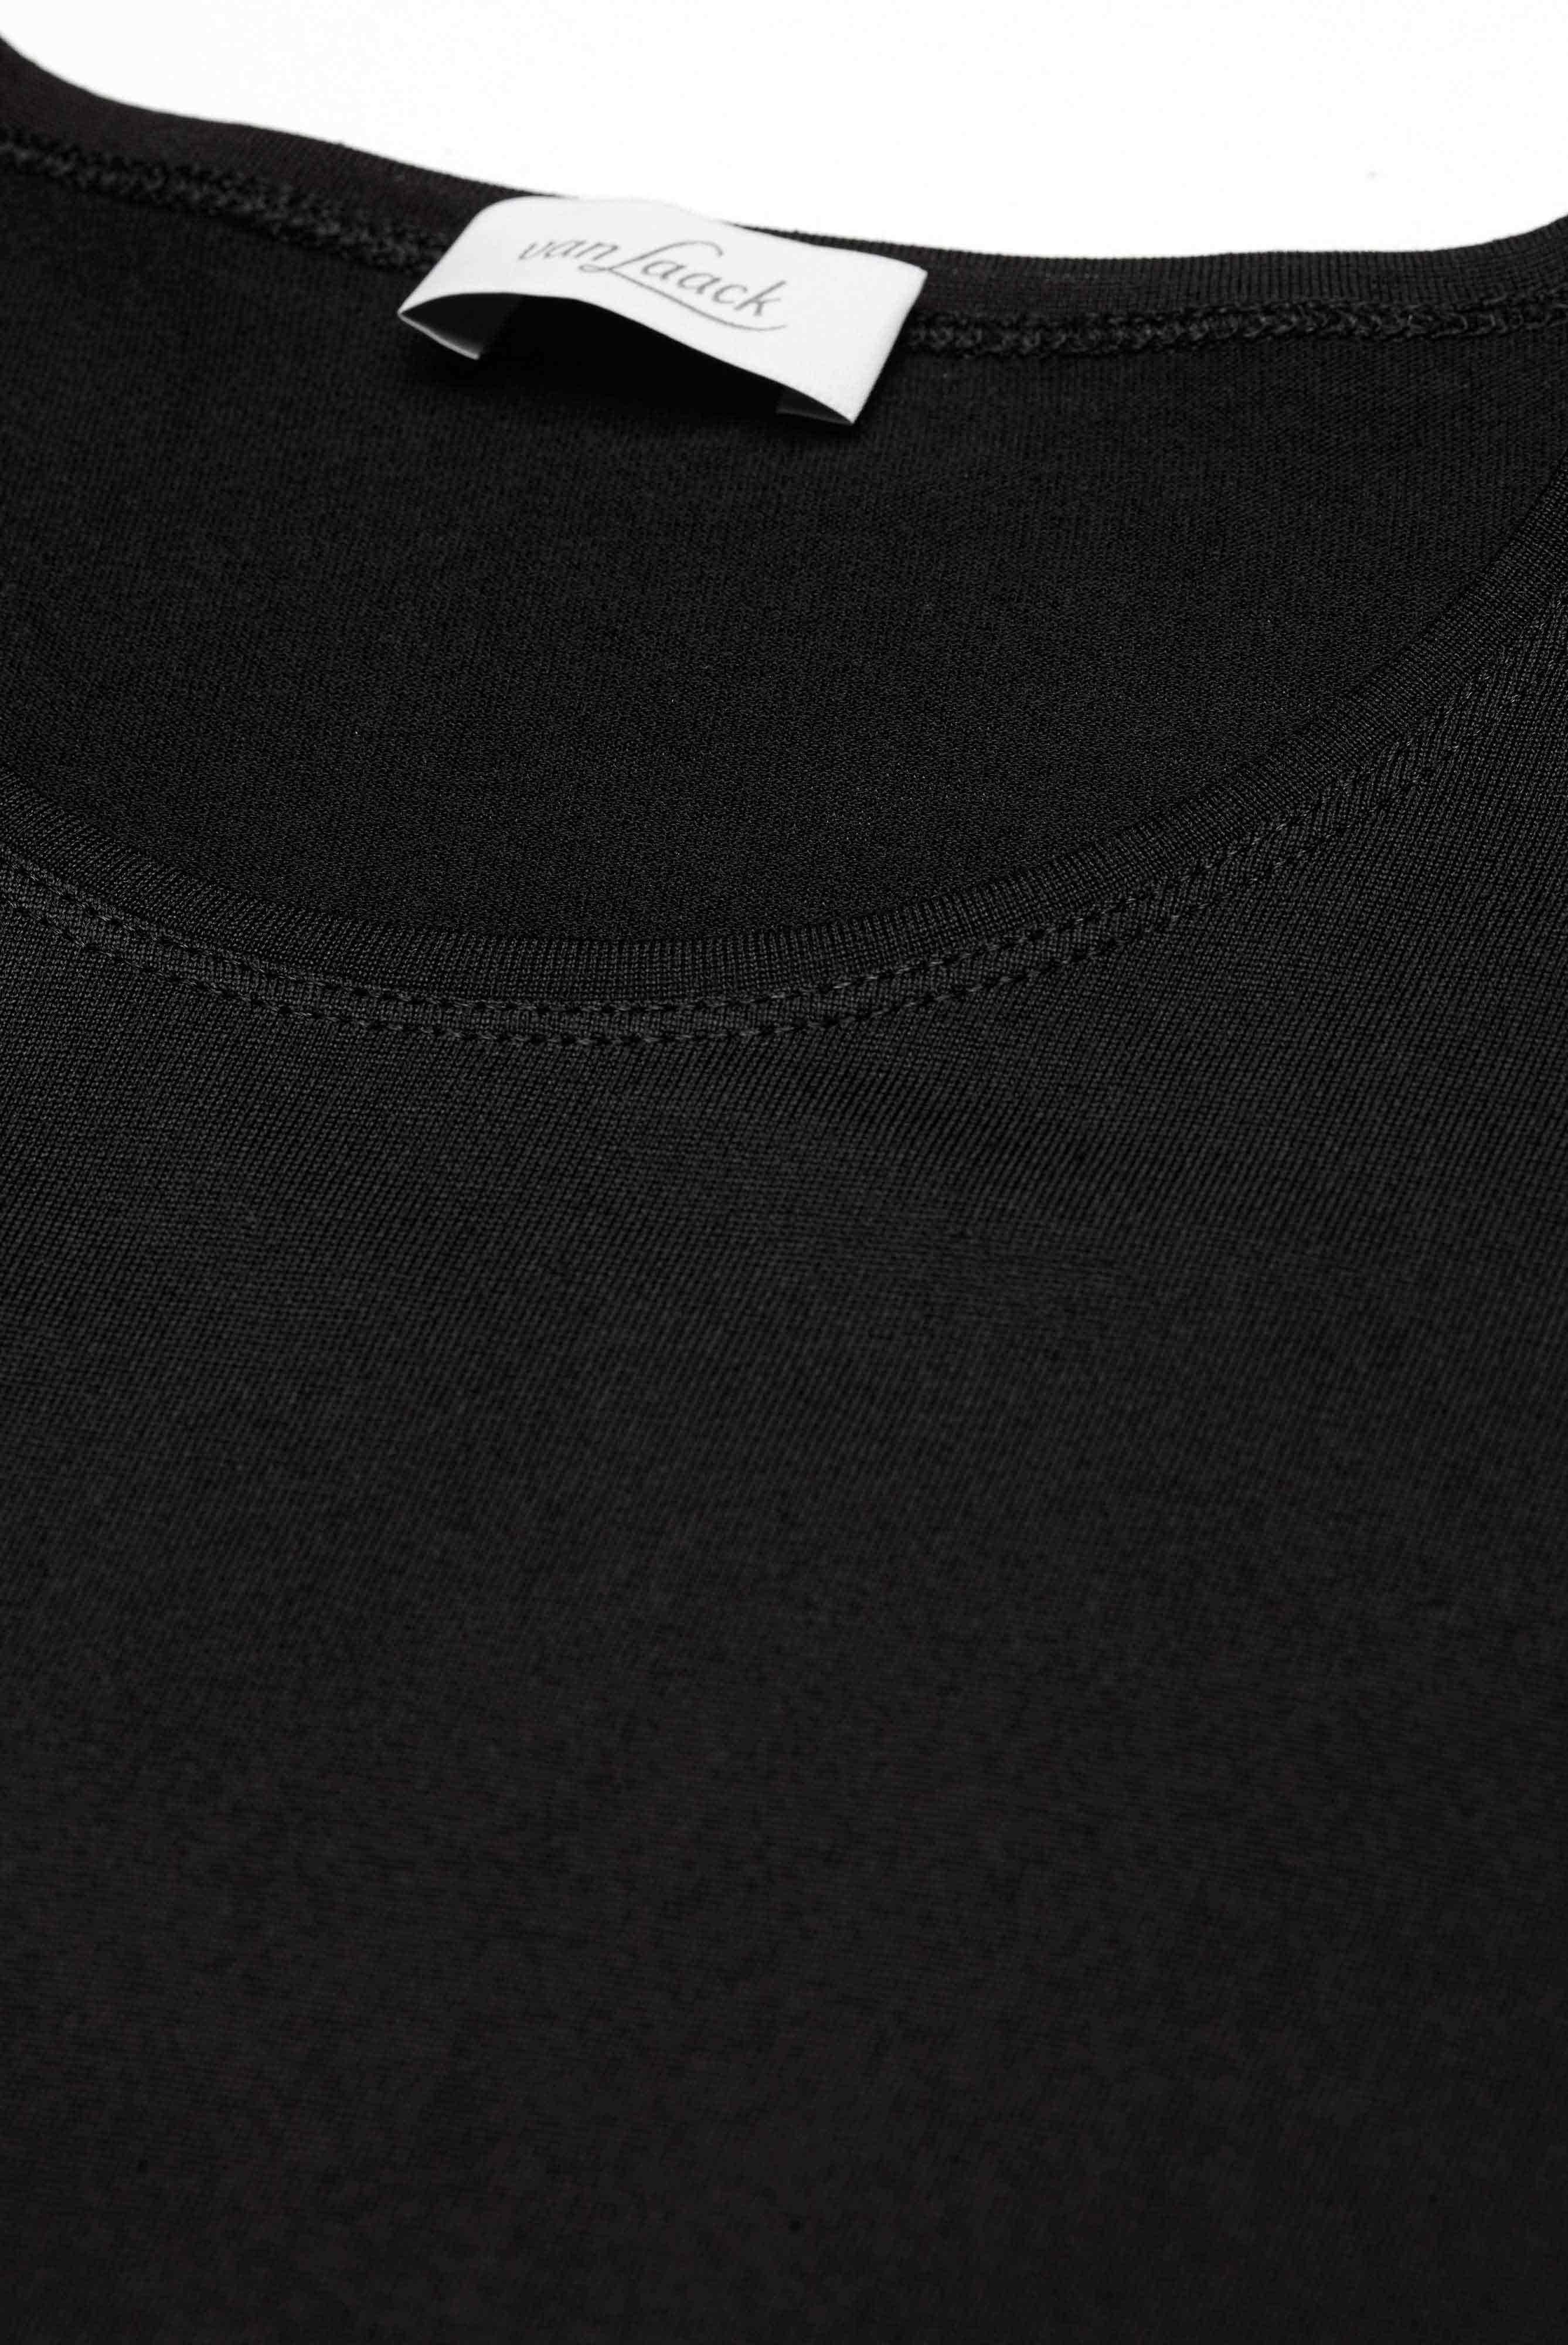 Tops & T-Shirts+Roundneck T-shirt with Silk+07.2122..Z20090.099.32